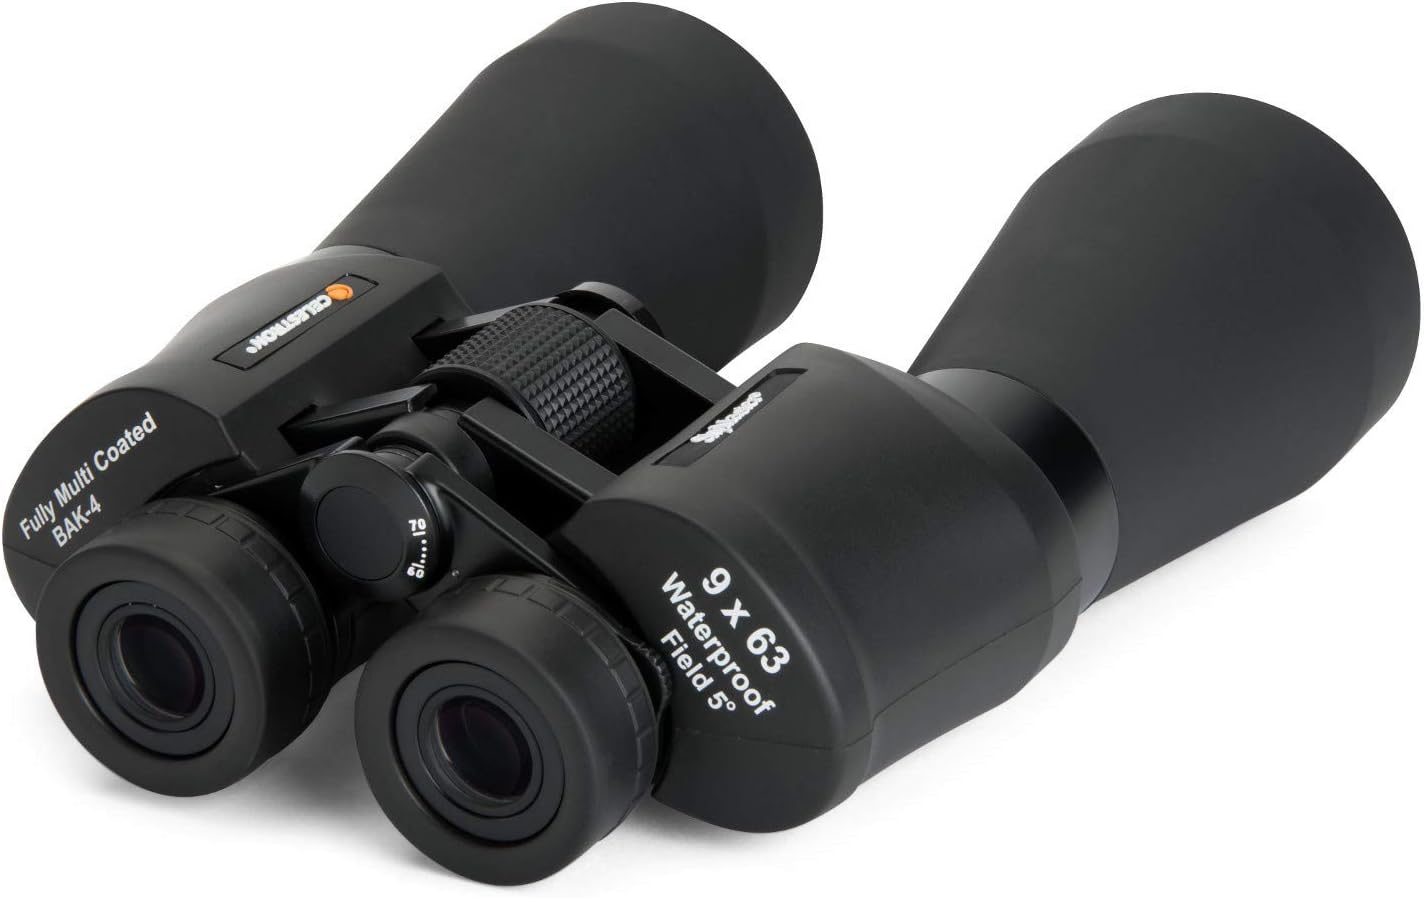 Celestron – SkyMaster DX 9x63mm Binoculars – – Premium Outdoor and Astronomy Binocular – Fully Multi-Coated Optics with XLT Coatings – Waterproof and Rubber Armored – Carrying Case Included